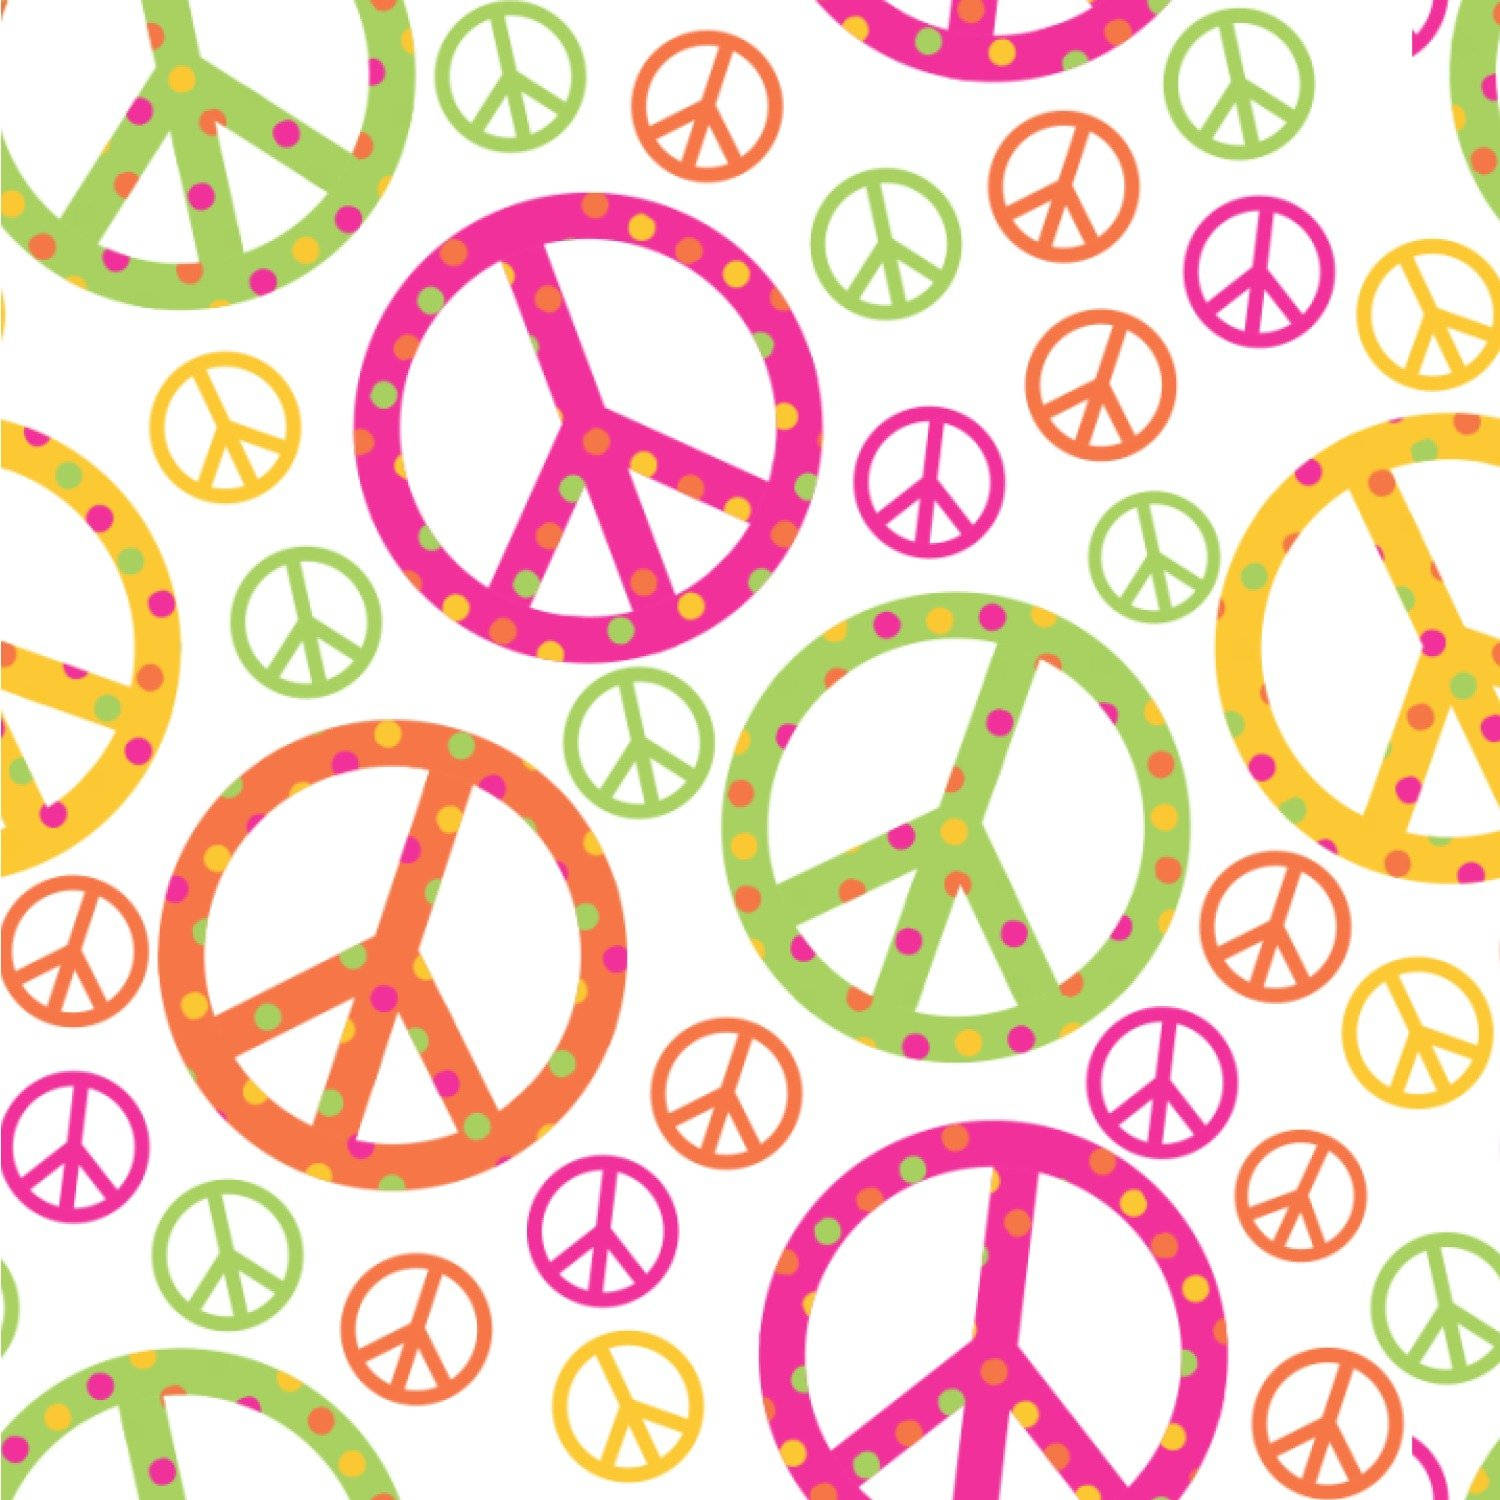 Colorful Peace Symbol With Polka Dots Background